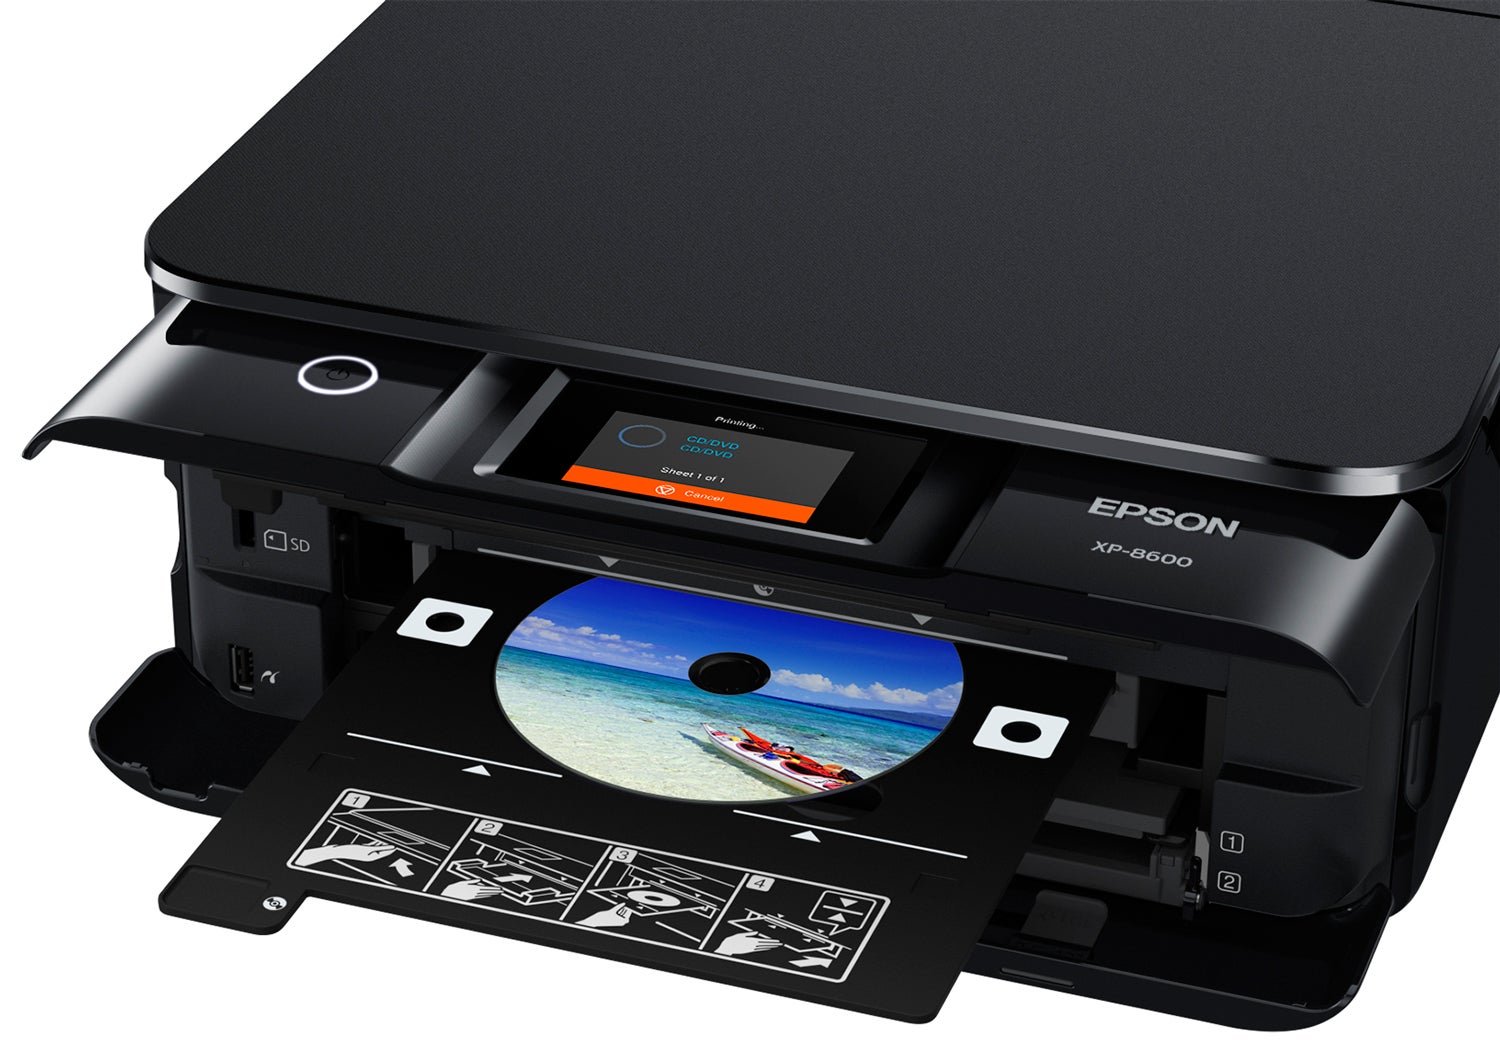  Epson  Expression Photo XP 8600 review Compact all in one 